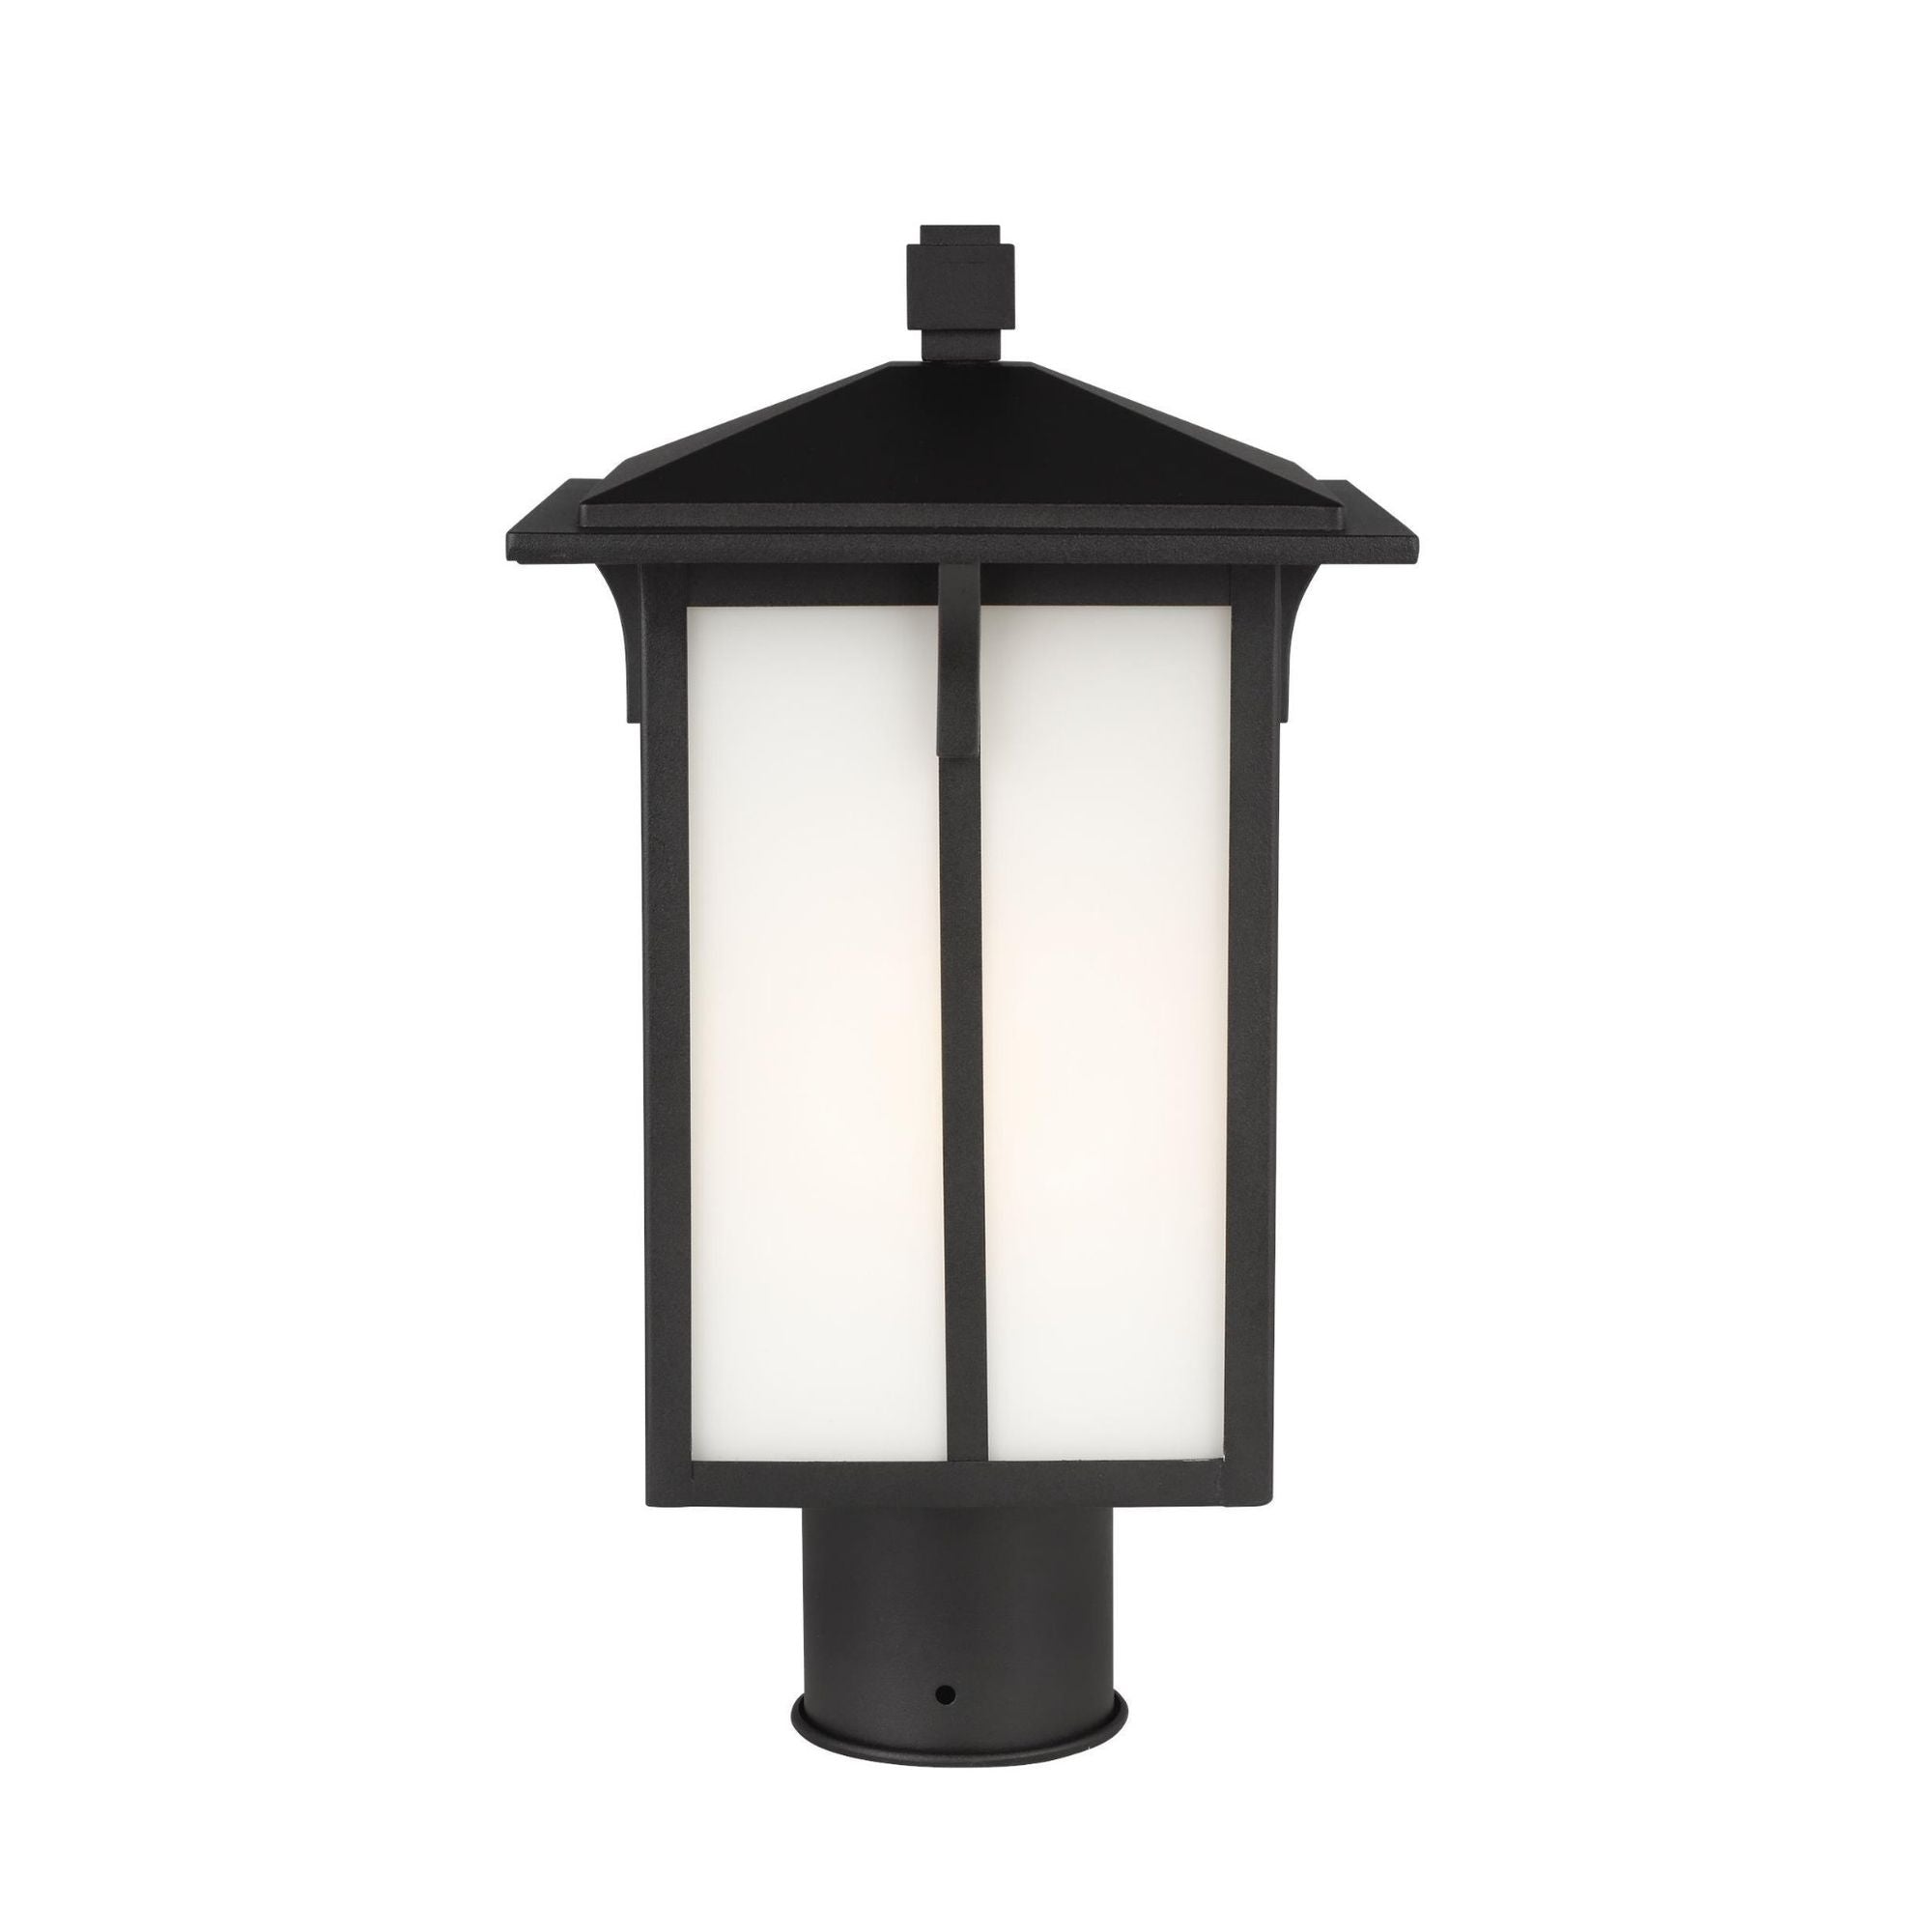 Tomek One Light Outdoor Post Lantern LED Transitional Fixture 8.375" Width 15.375" Height Aluminum Rectangular Etched / White Inside Shade in Black